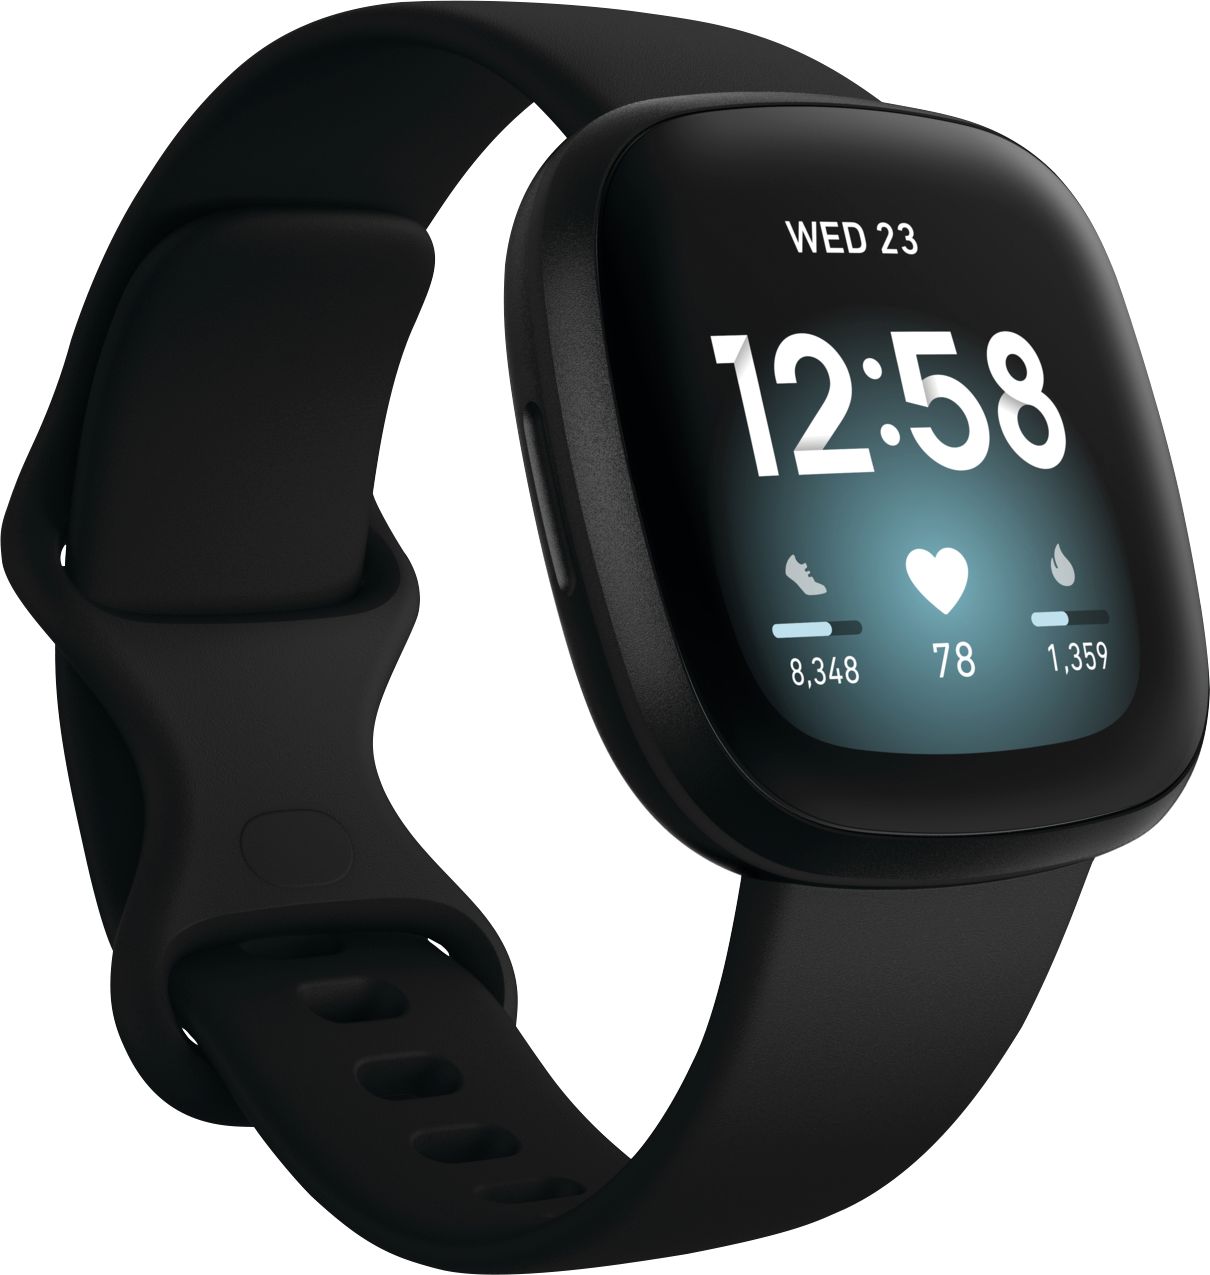 Zoom in on Angle Zoom. Fitbit - Versa 3 Health & Fitness Smartwatch - Black.